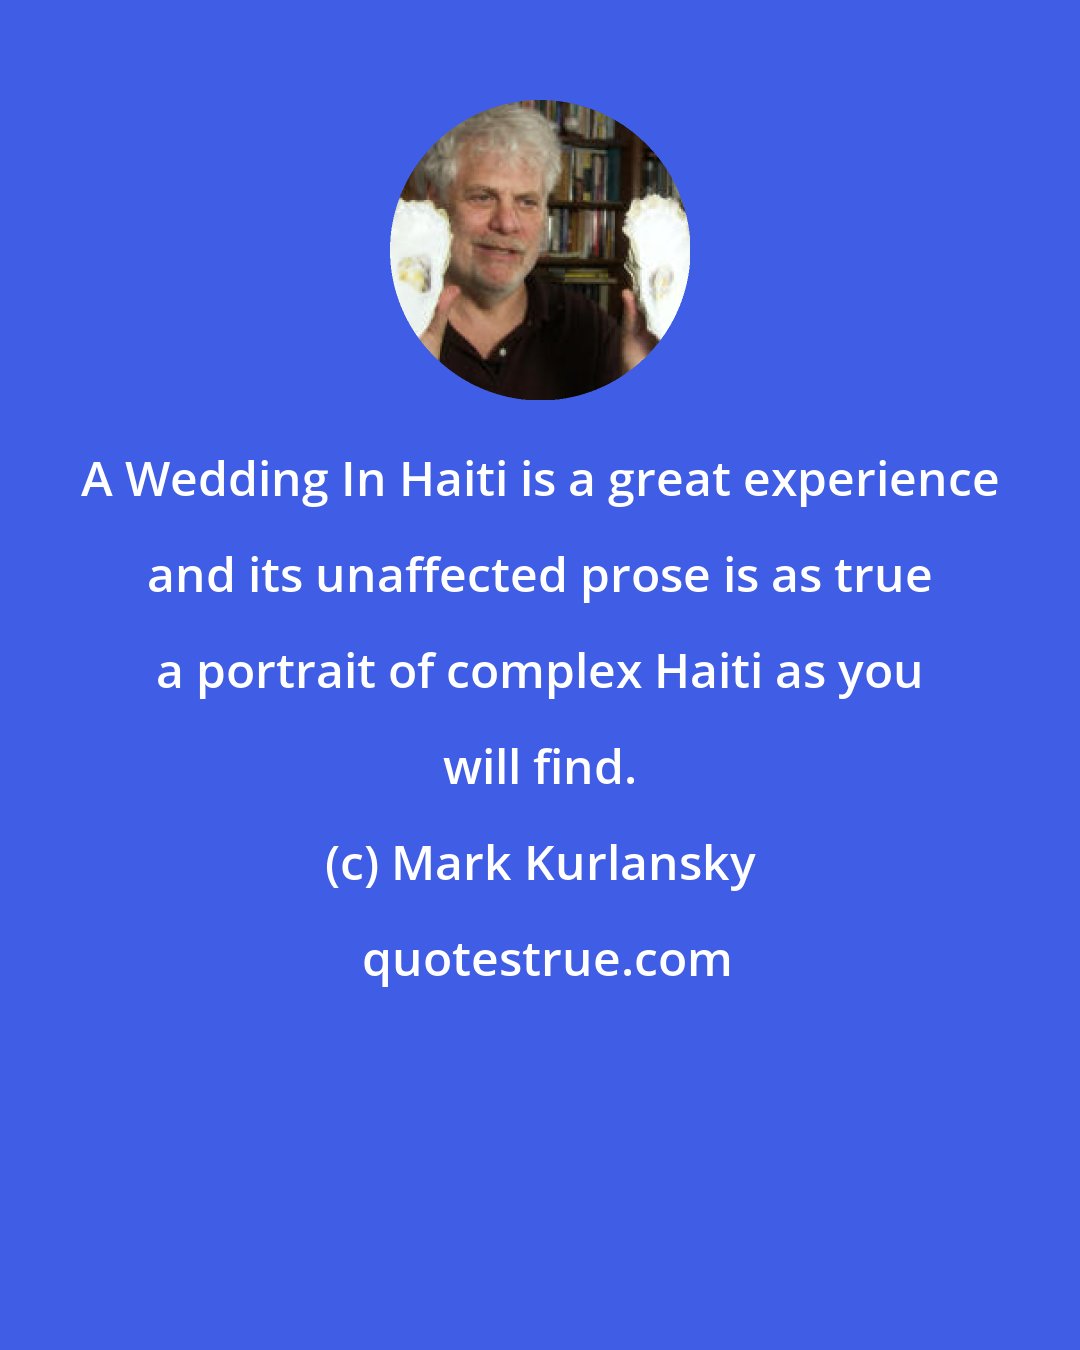 Mark Kurlansky: A Wedding In Haiti is a great experience and its unaffected prose is as true a portrait of complex Haiti as you will find.